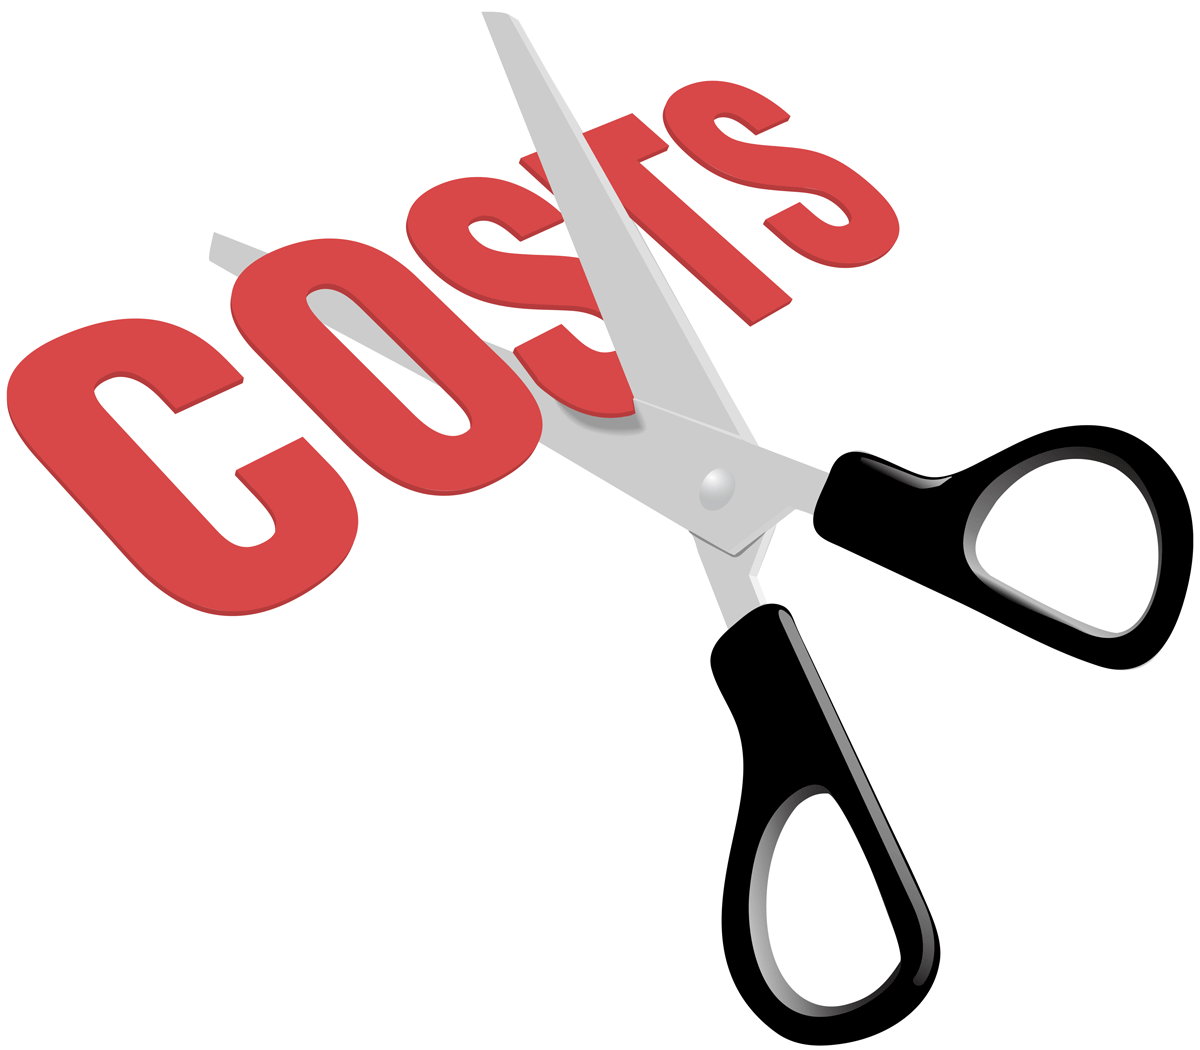 Cut costs with HVAC tips